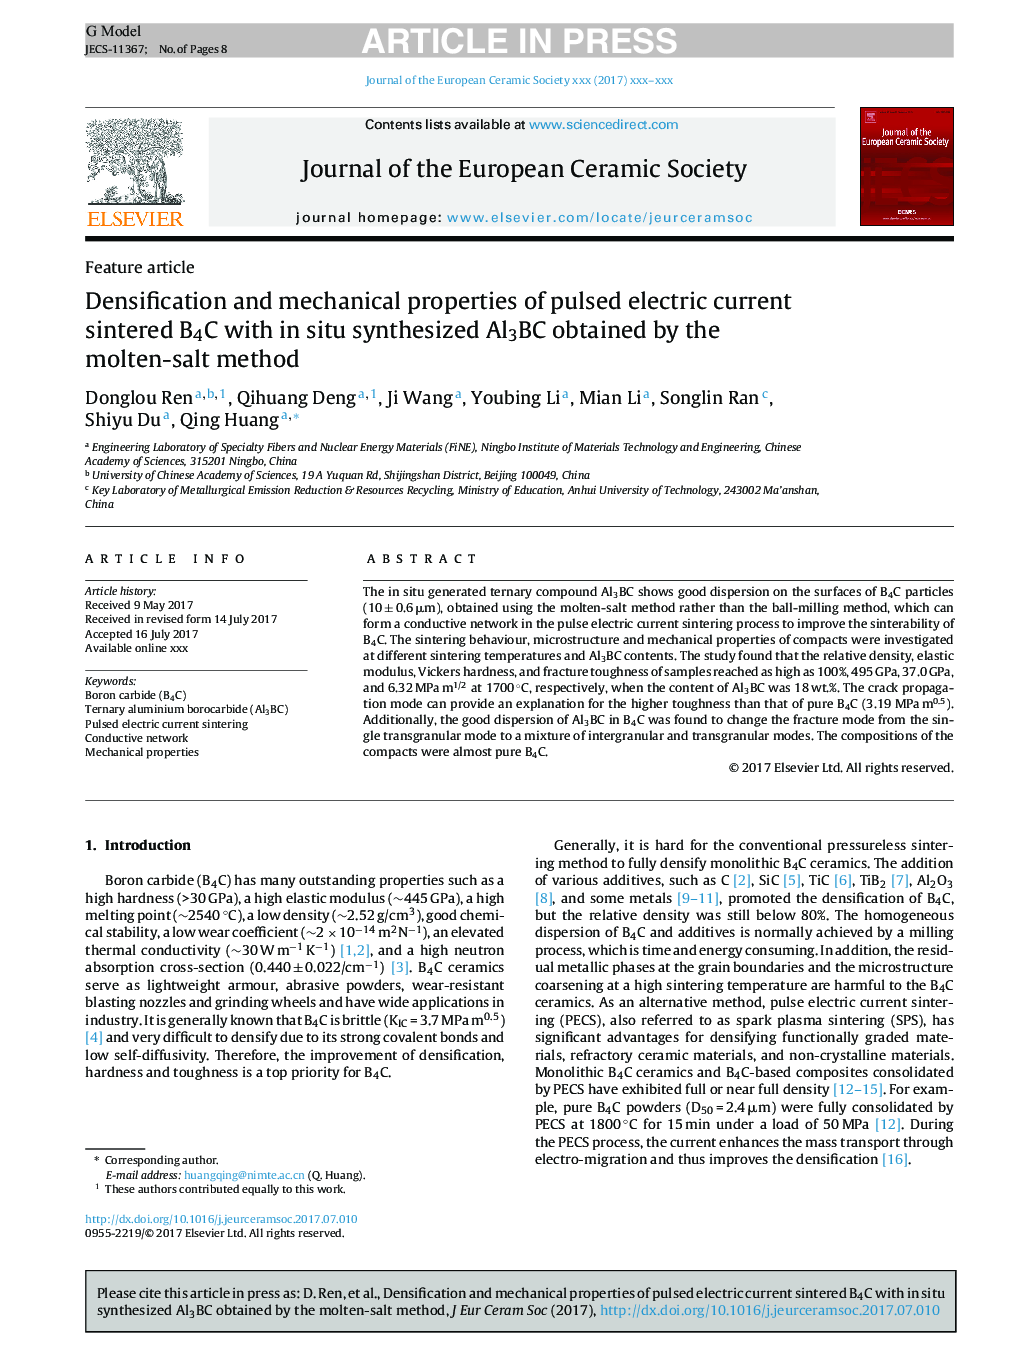 Densification and mechanical properties of pulsed electric current sintered B4C with in situ synthesized Al3BC obtained by the molten-salt method